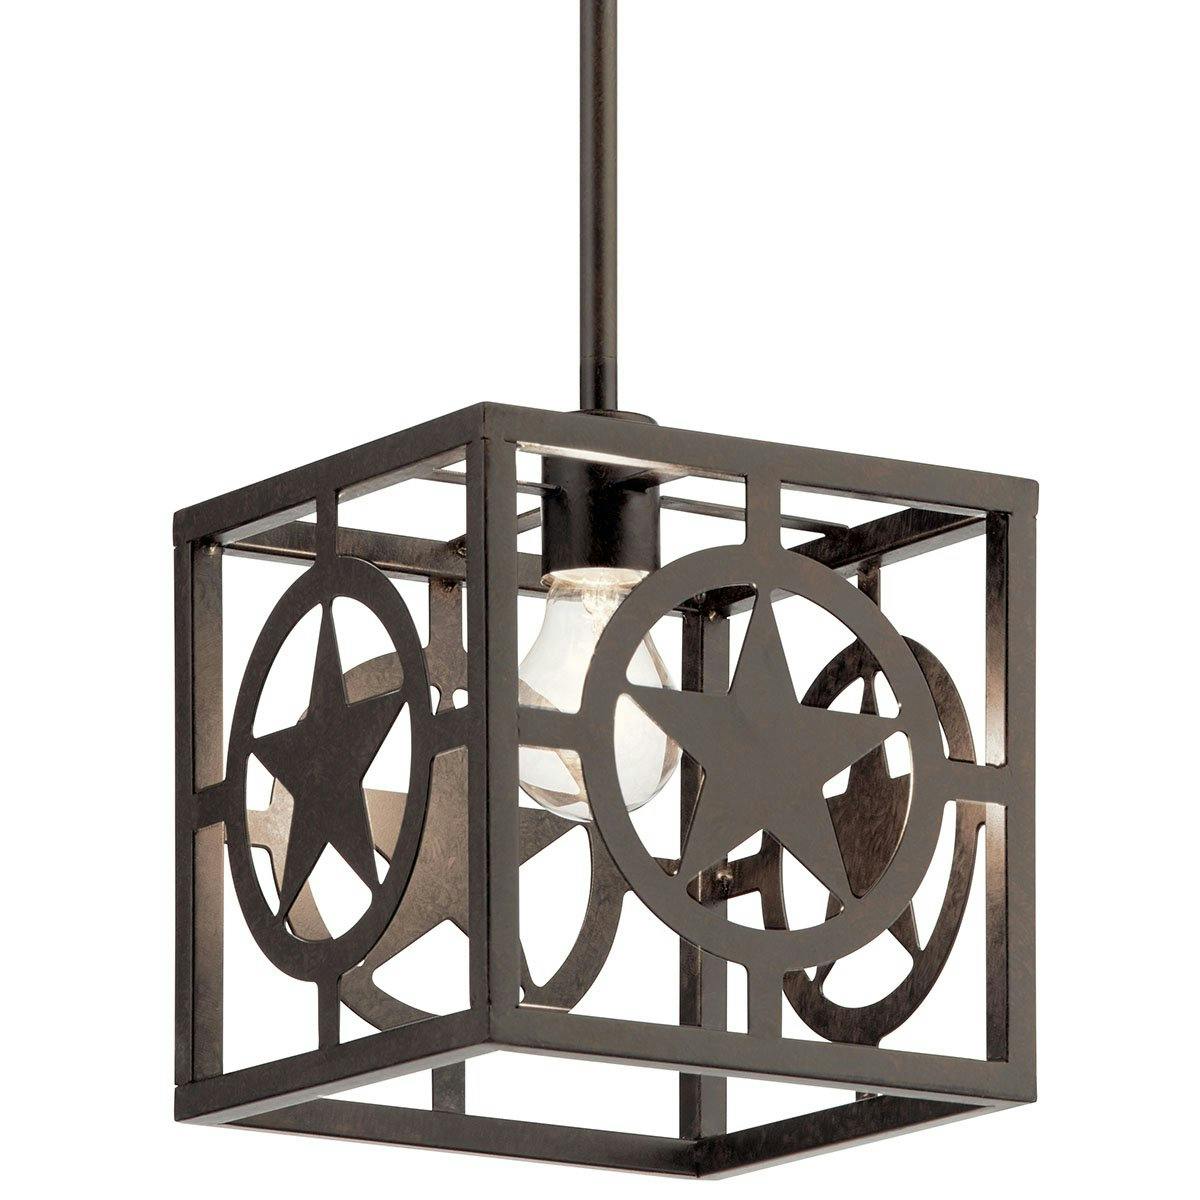 Branko 9.62" 1 Light Mini Pendant Bronze without the canopy on a white background